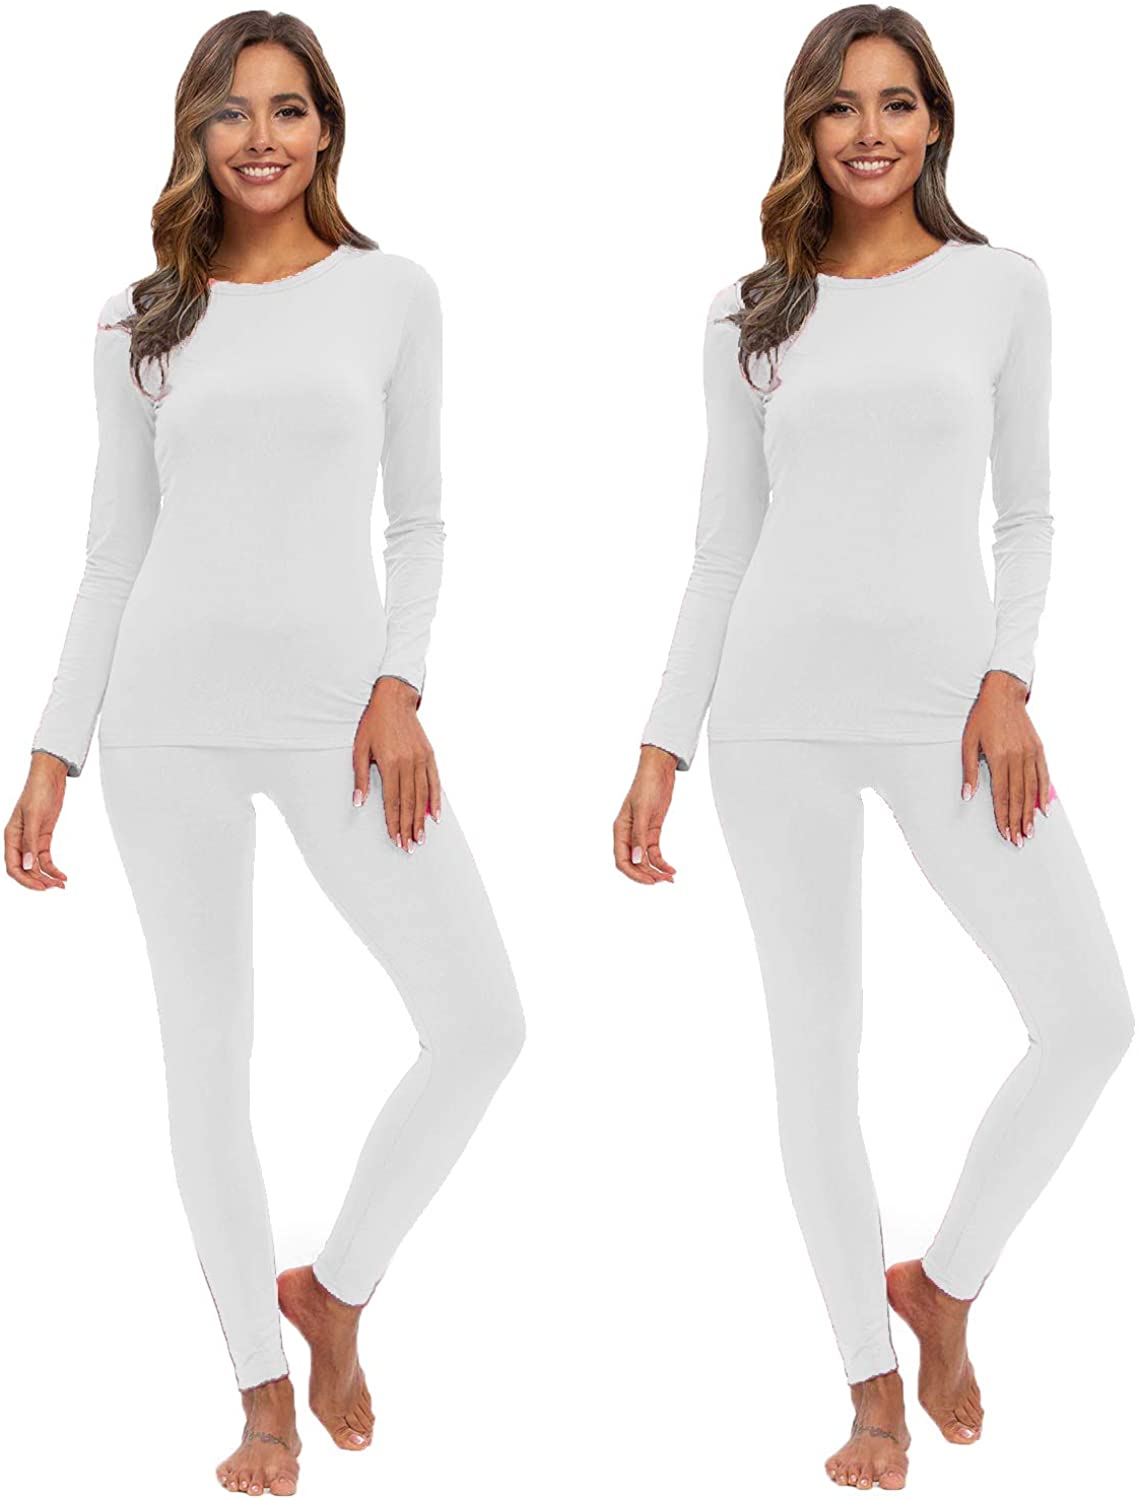 Artfish Ladies Womens Ultra Soft Thermal Underwear Long Johns Set with Fleece Lined 